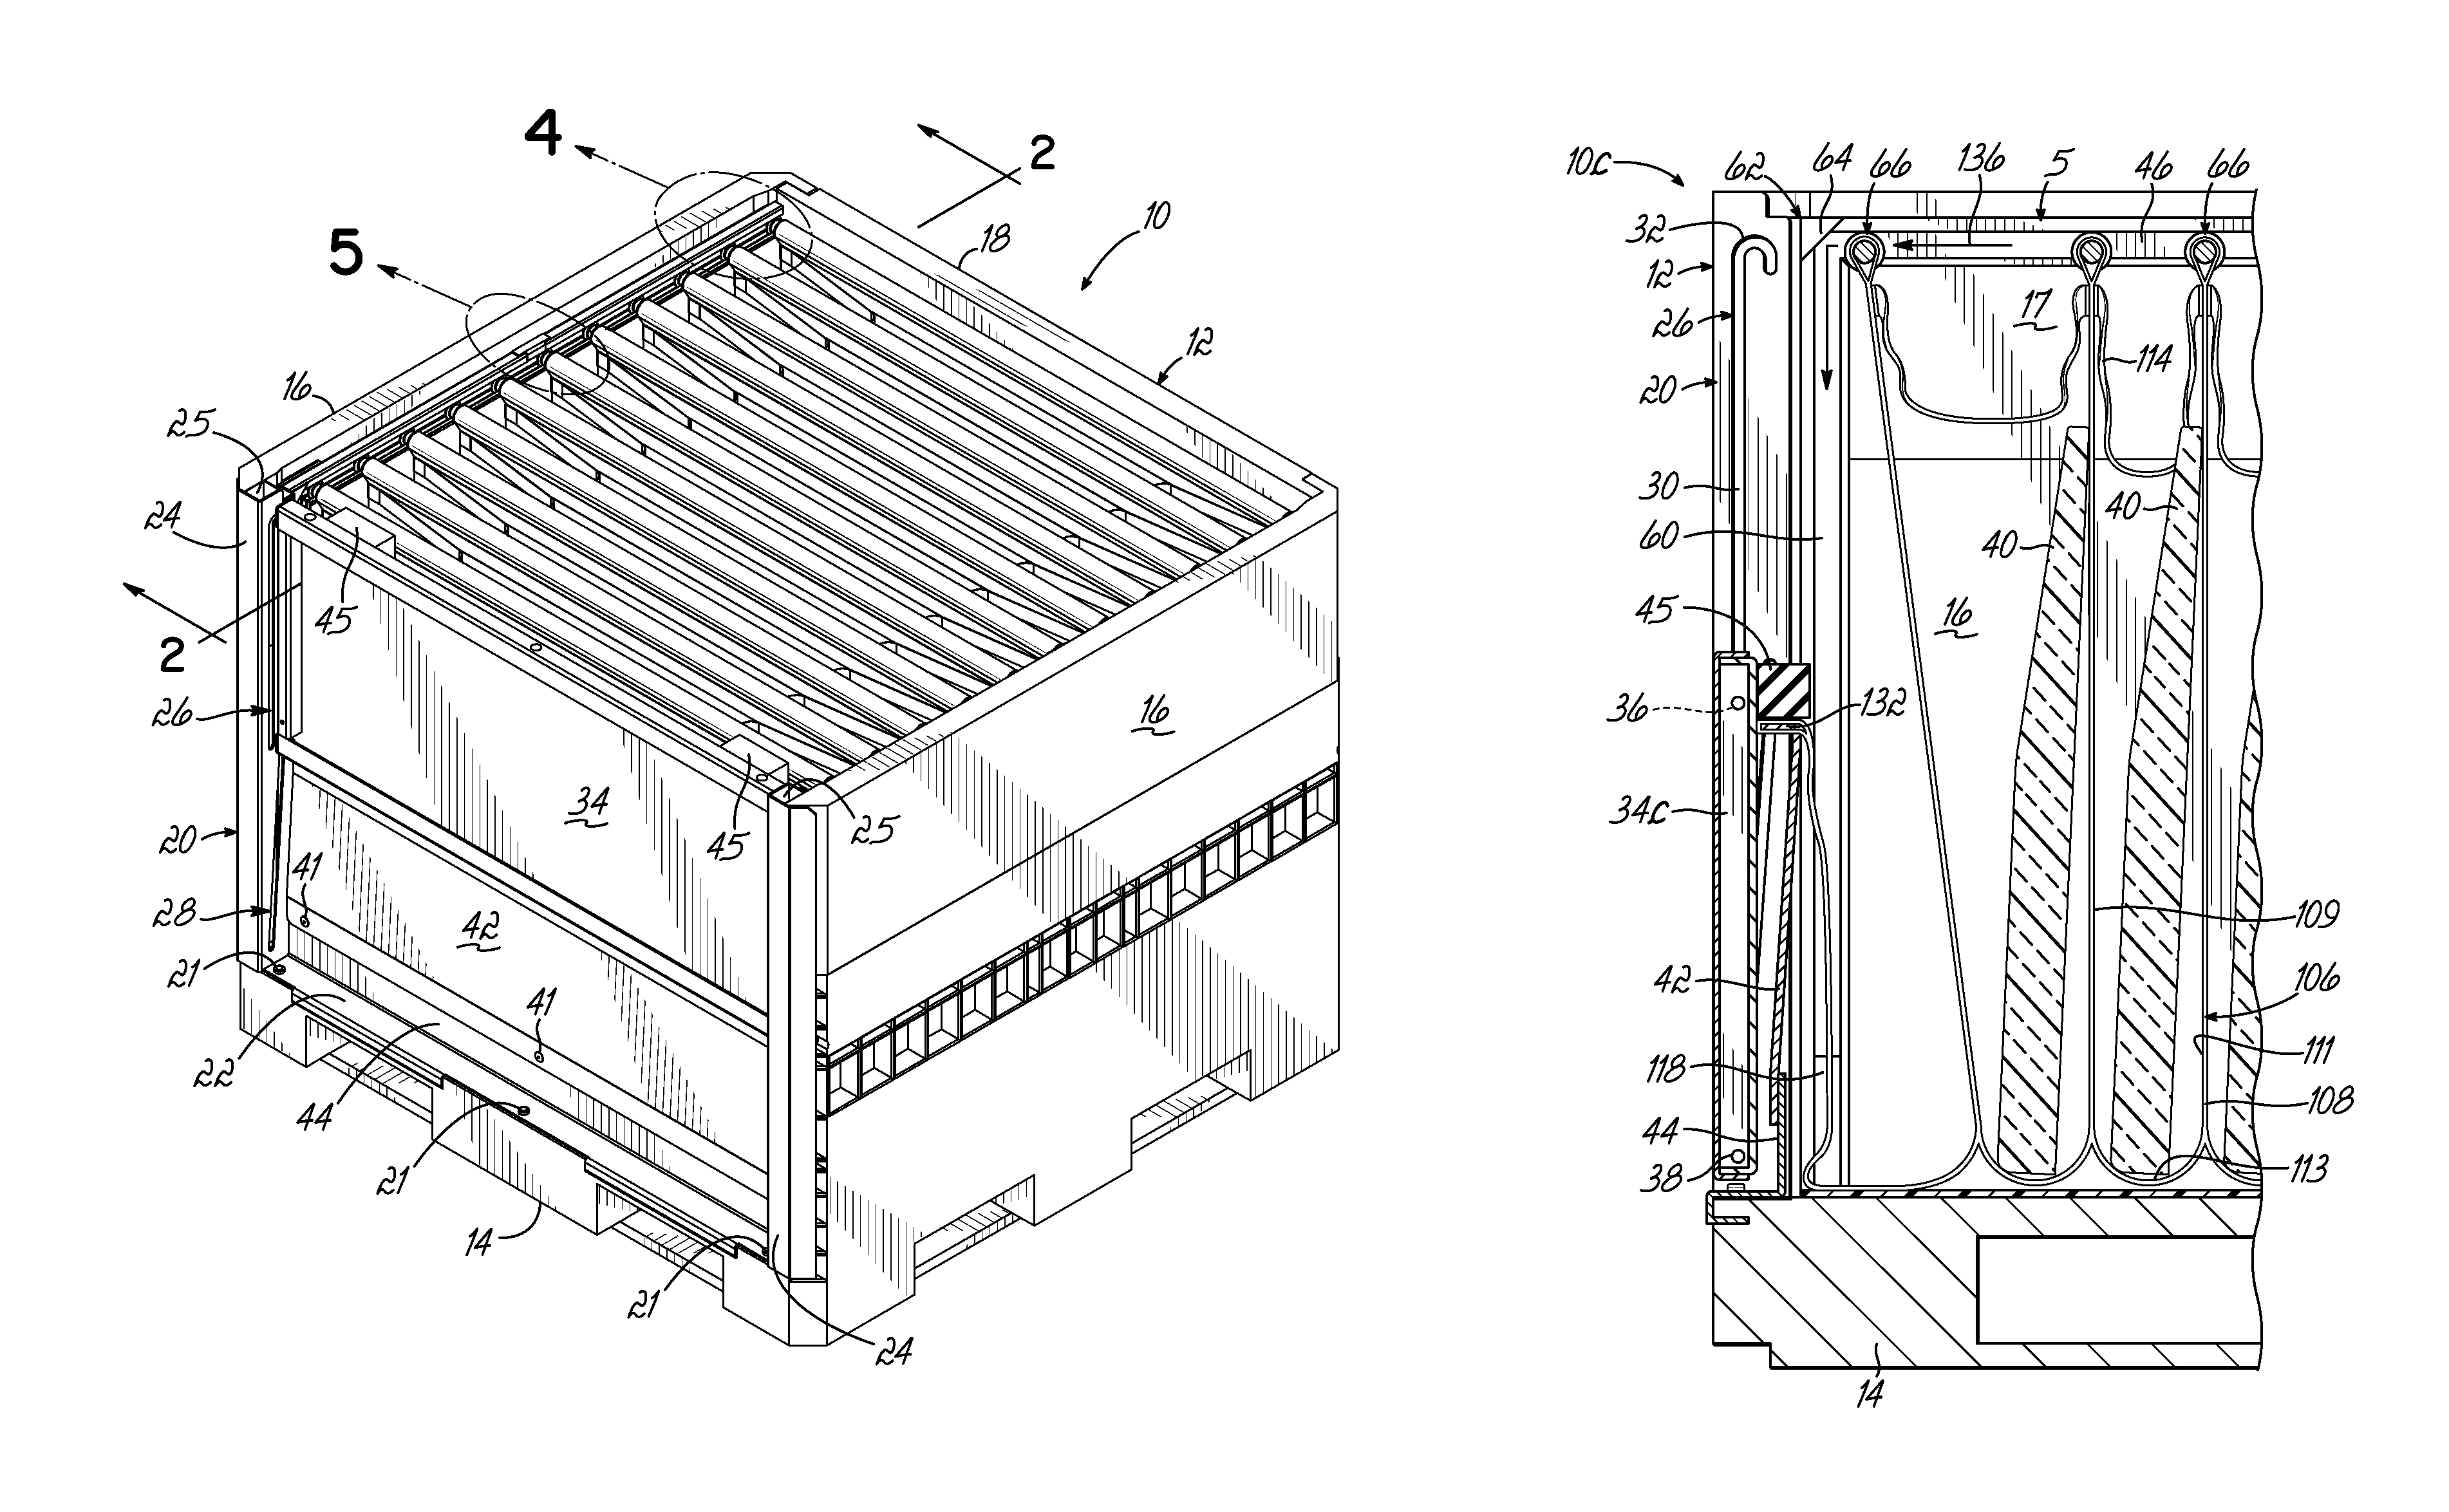 Container having movable support member assemblies for supporting dunnage and movable door